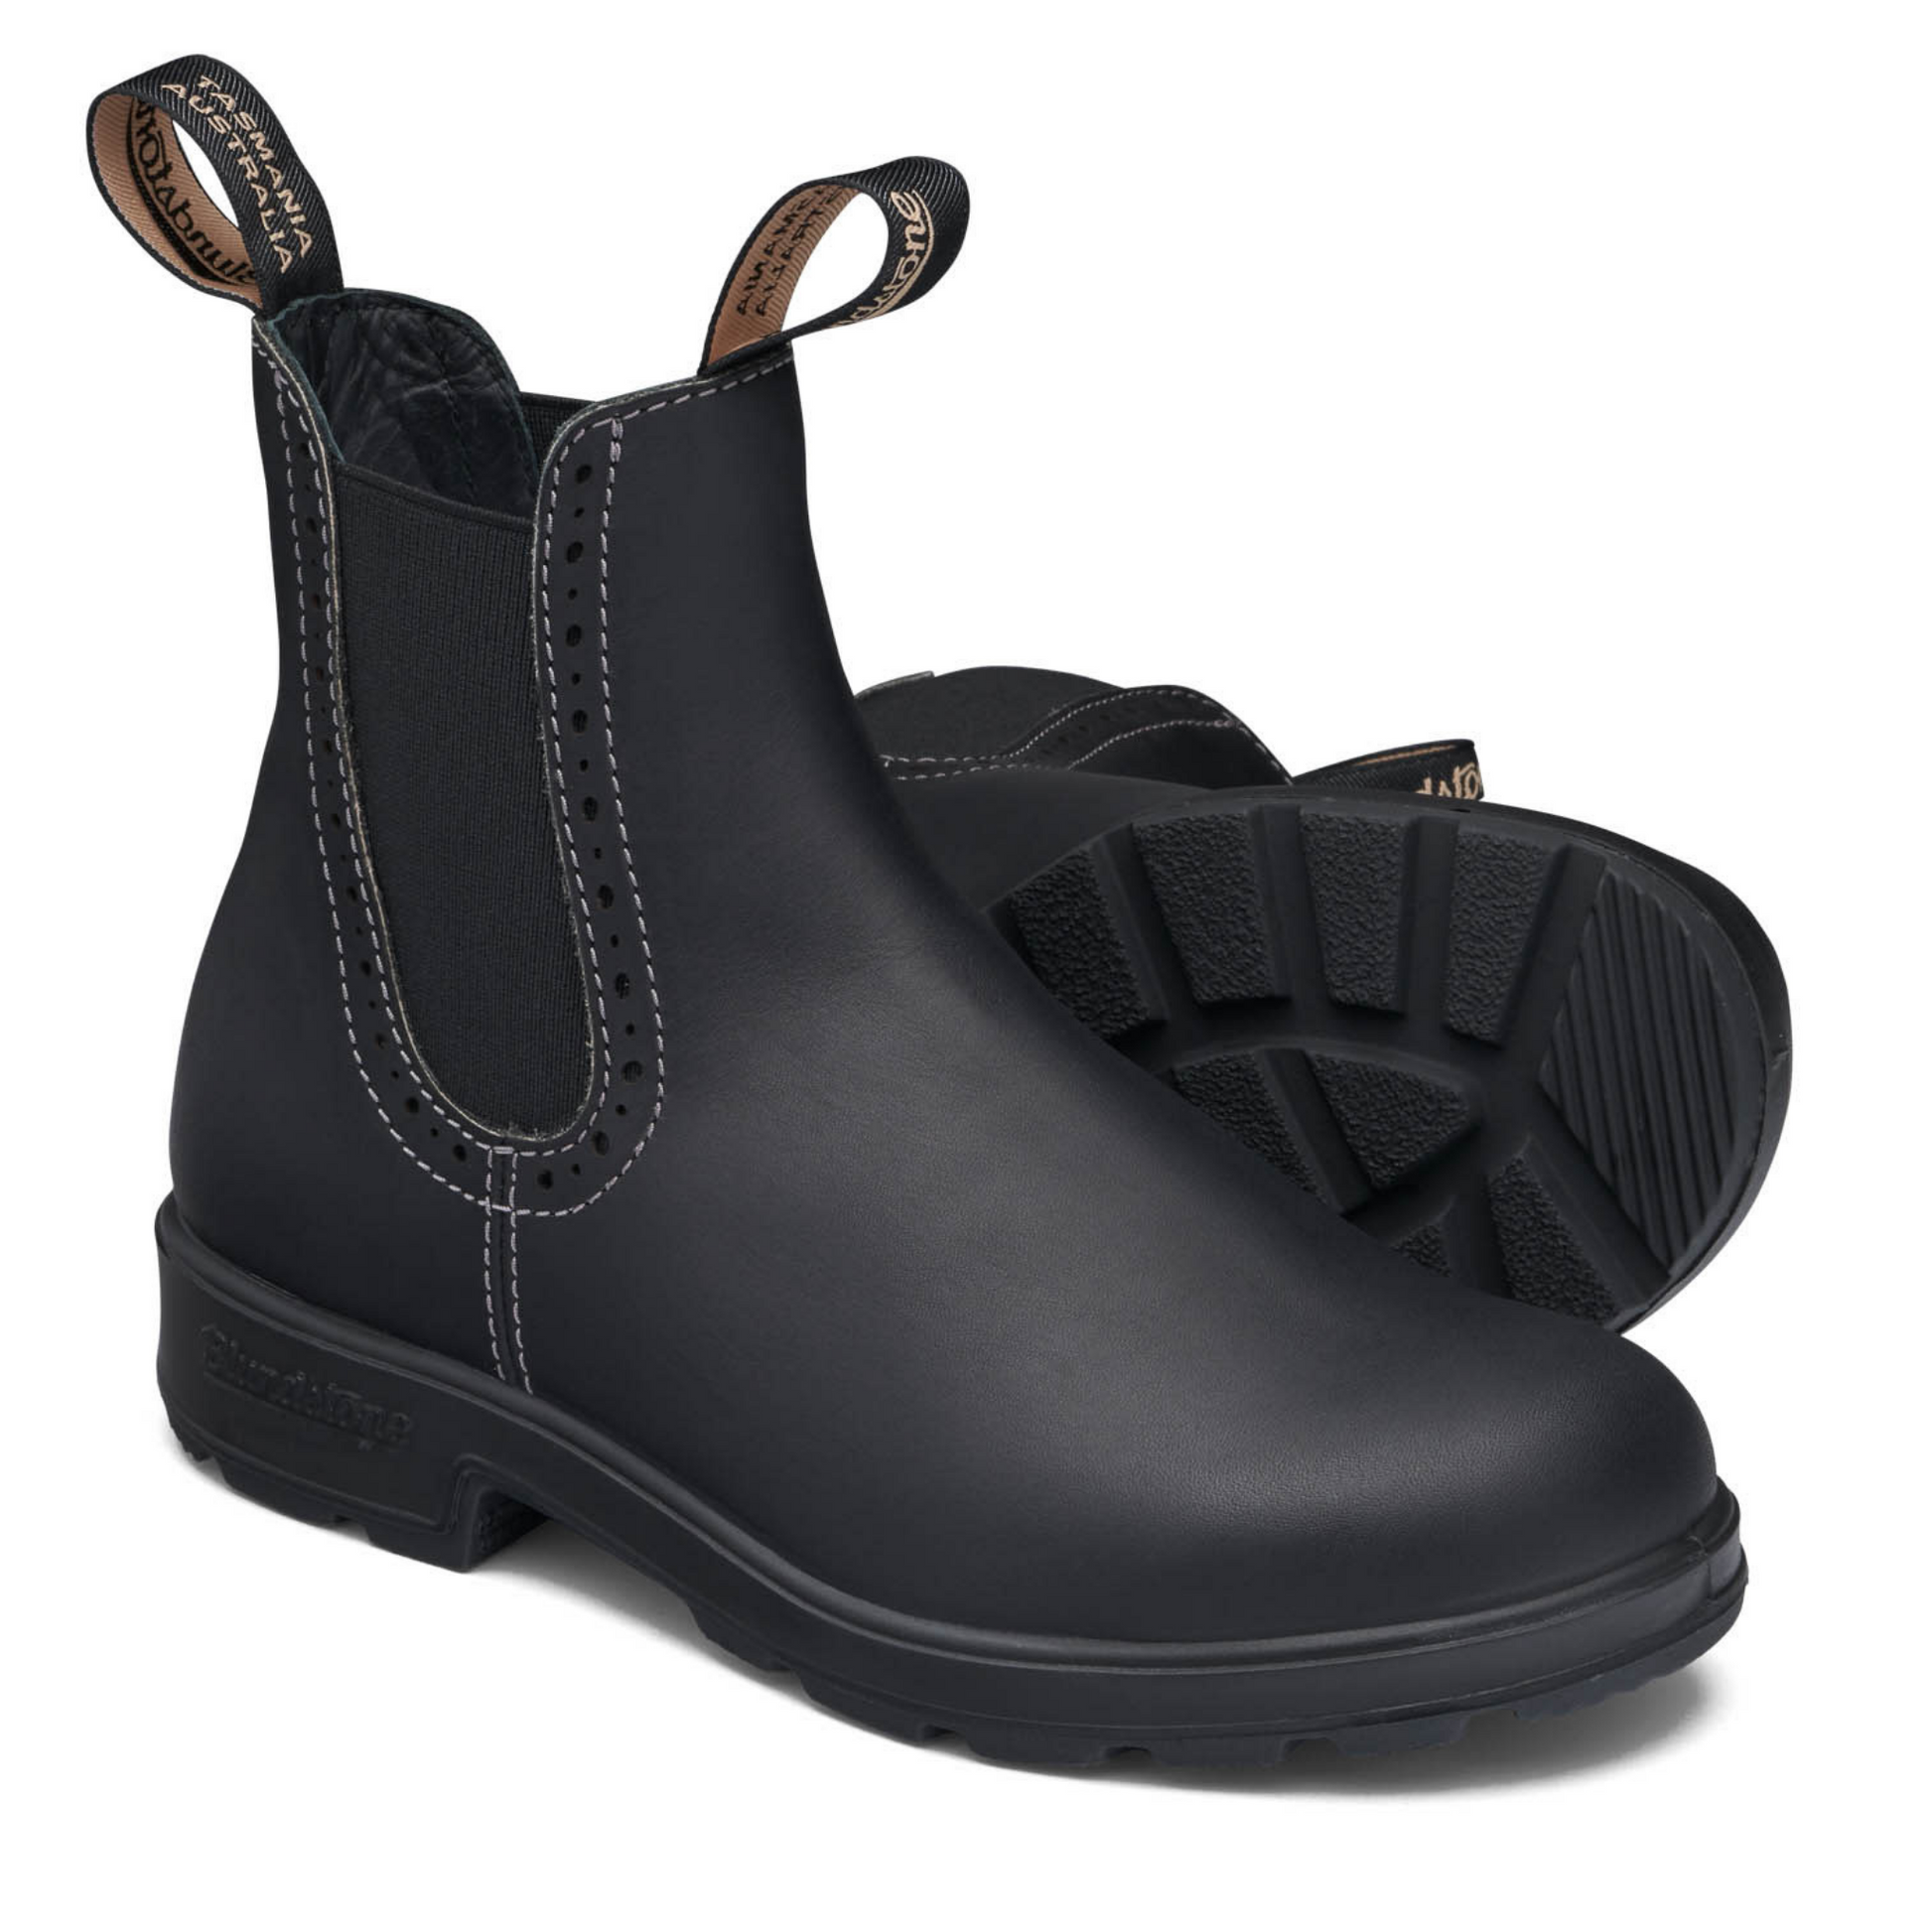 A pair of women's black boots with white stitching and a black sole.